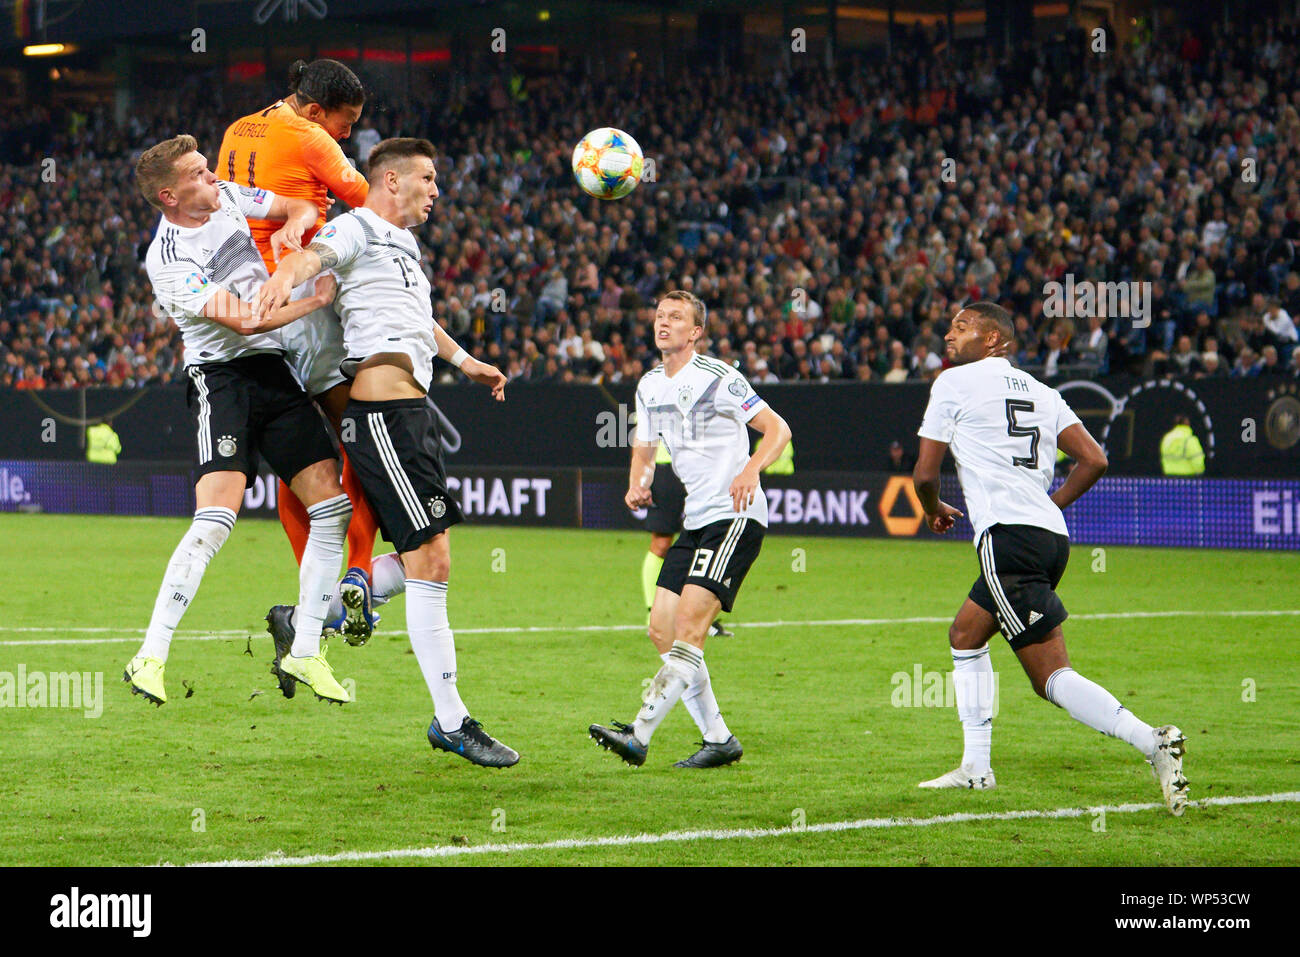 Hamburg, Germany. 06th Sep, 2019. Virgil VAN DIJK, NL 4  compete for the ball, tackling, duel, header, zweikampf, action, fight against Niklas SUELE, DFB 15   Matthias GINTER, DFB 4 Lukas KLOSTERMANN, DFB 13 Jonathan TAH, DFB 5  GERMANY - NETHERLANDS 2-4 Football  Euro 2021 qualification Season 2019/2020,  EM-Qualifikation Group C Hamburg, Germany, September 06, 2019. © Peter Schatz / Alamy Live News Stock Photo